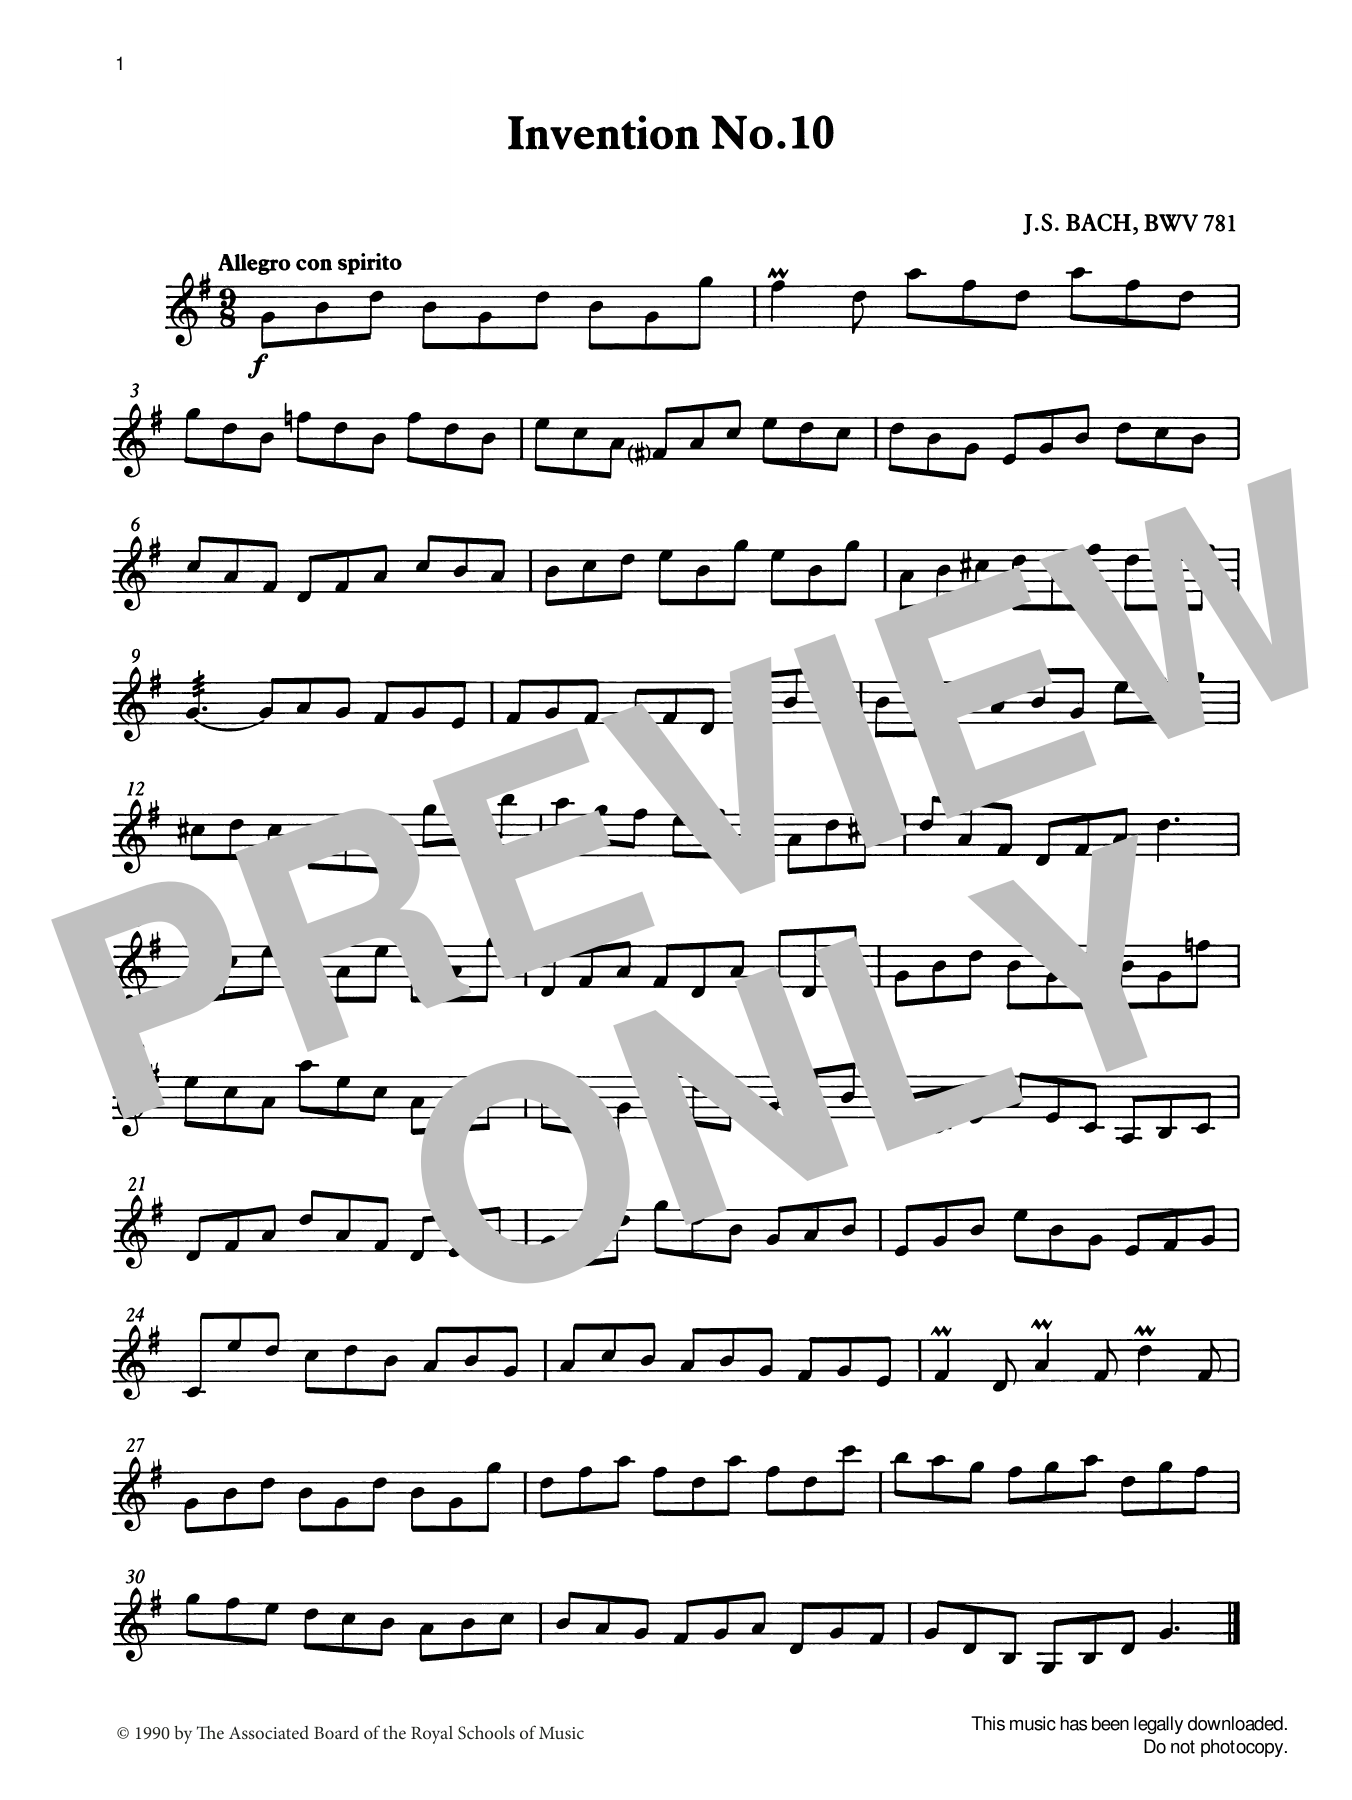 Download J. S. Bach Invention No.10 from Graded Music for T Sheet Music